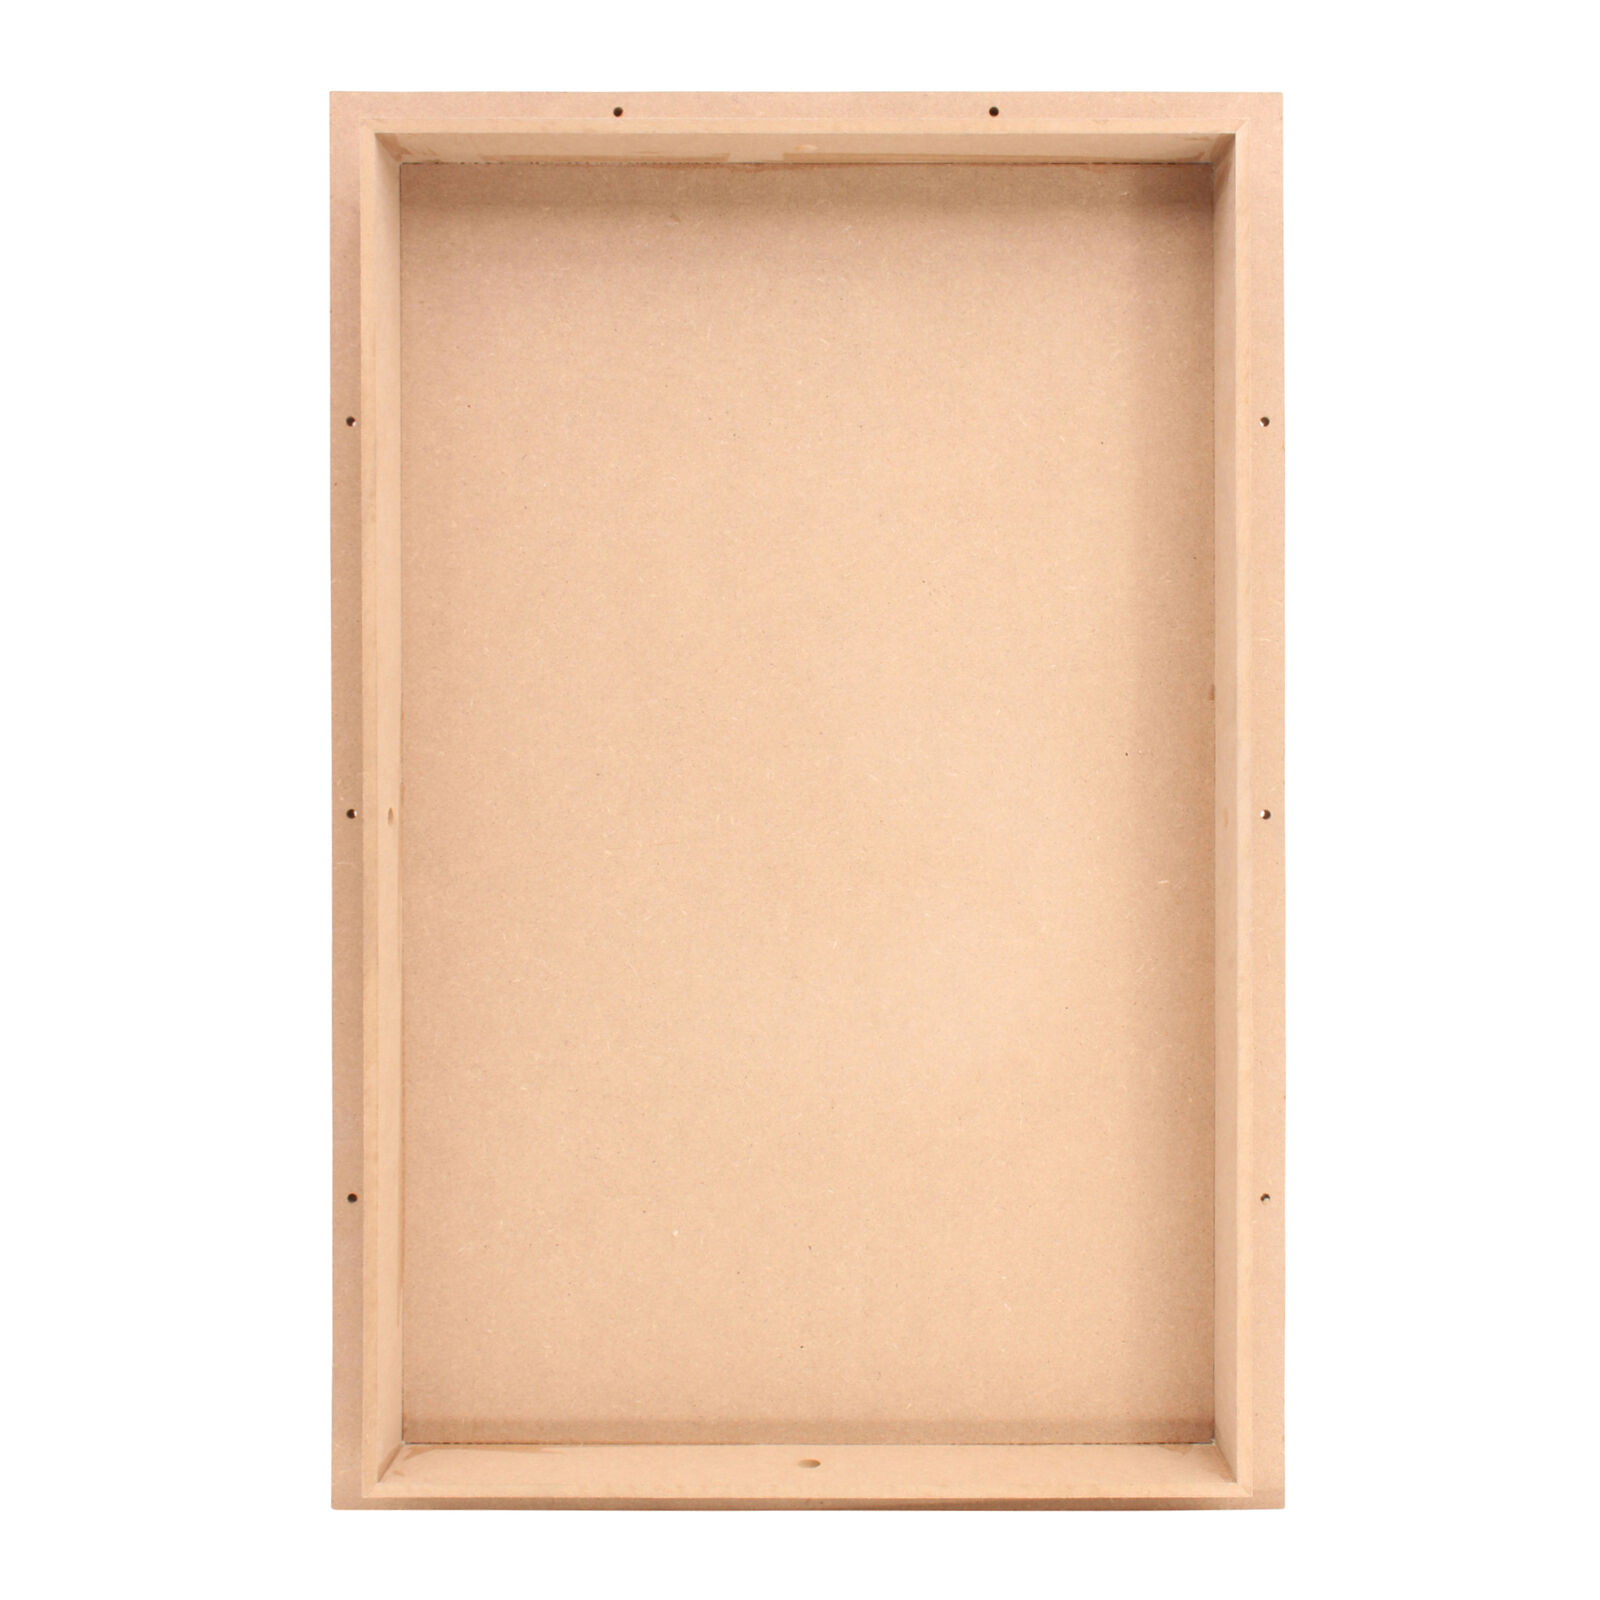 Sonance Is4-isw 92723 Large Space Saver Wood Back-box For Invisible Series